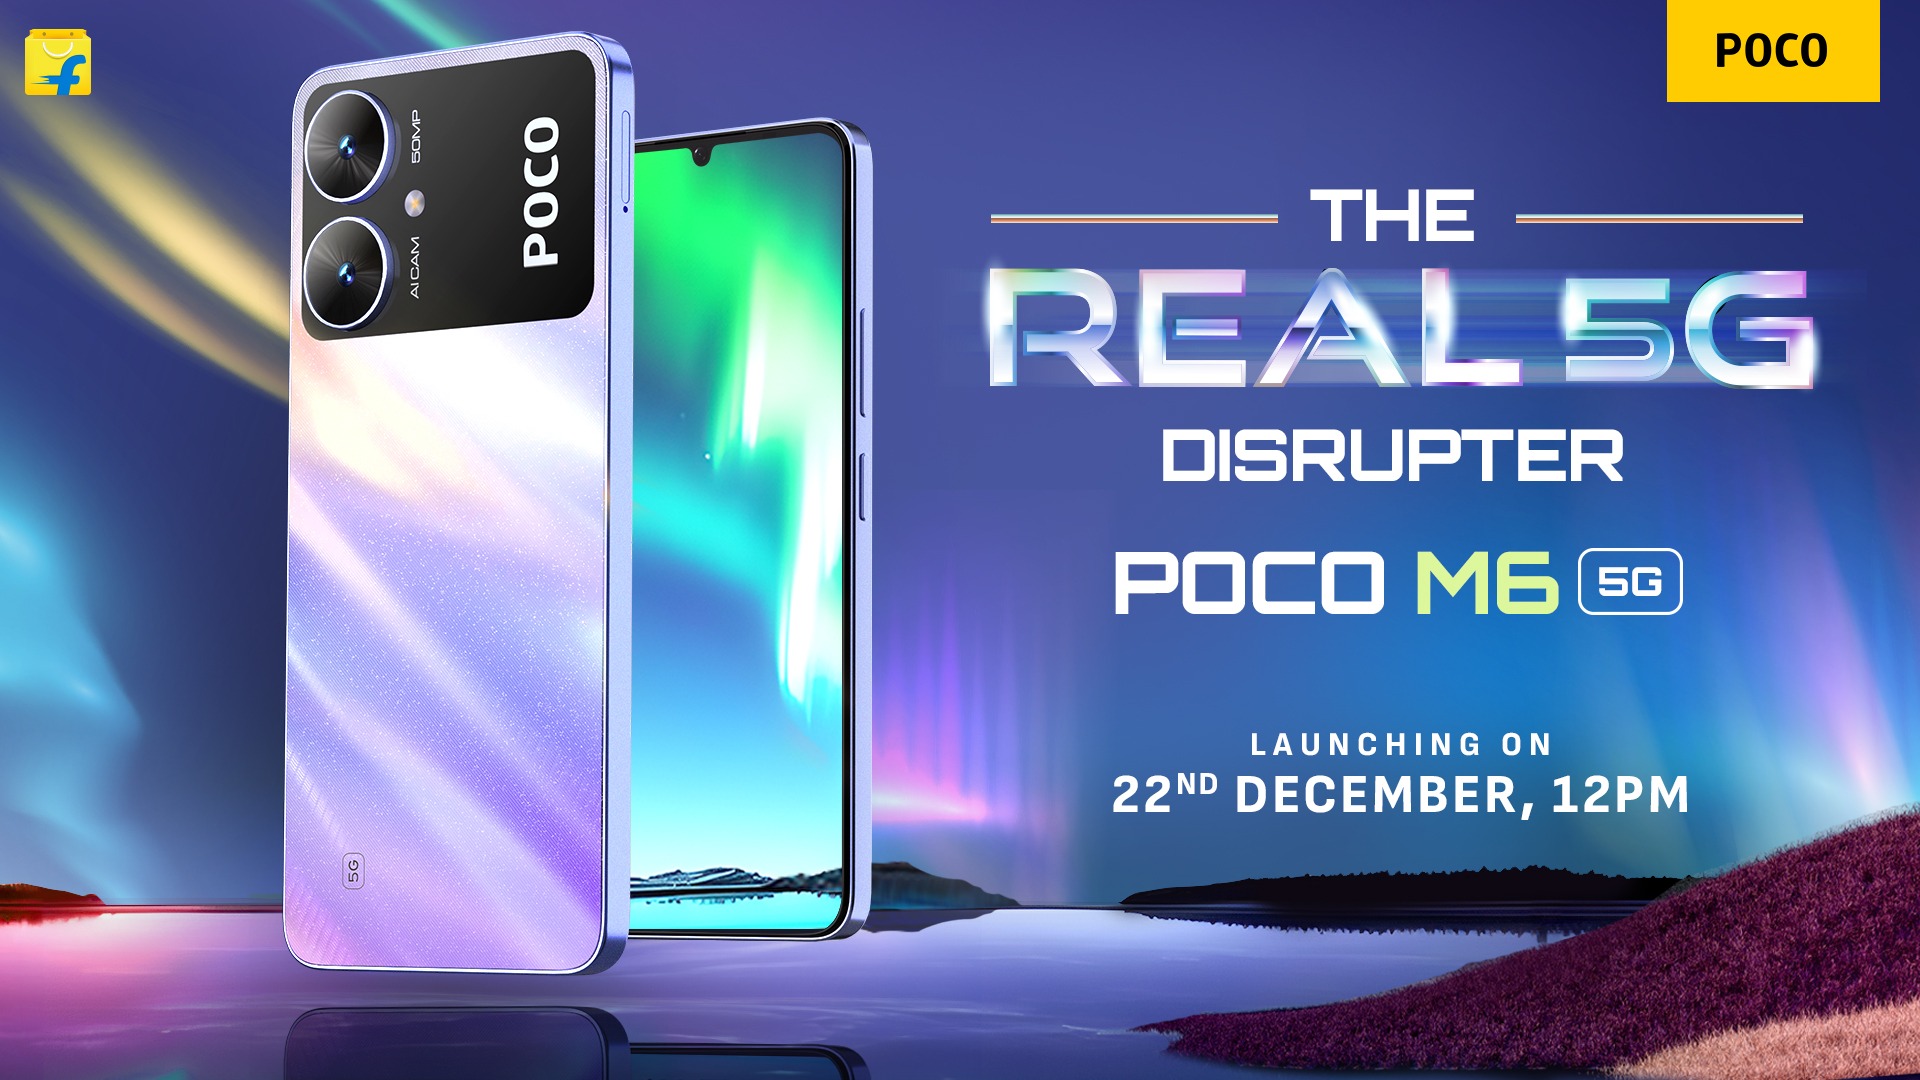 Poco launches 5G-enabled Poco M6 Pro in India under Rs 10,000 - India Today